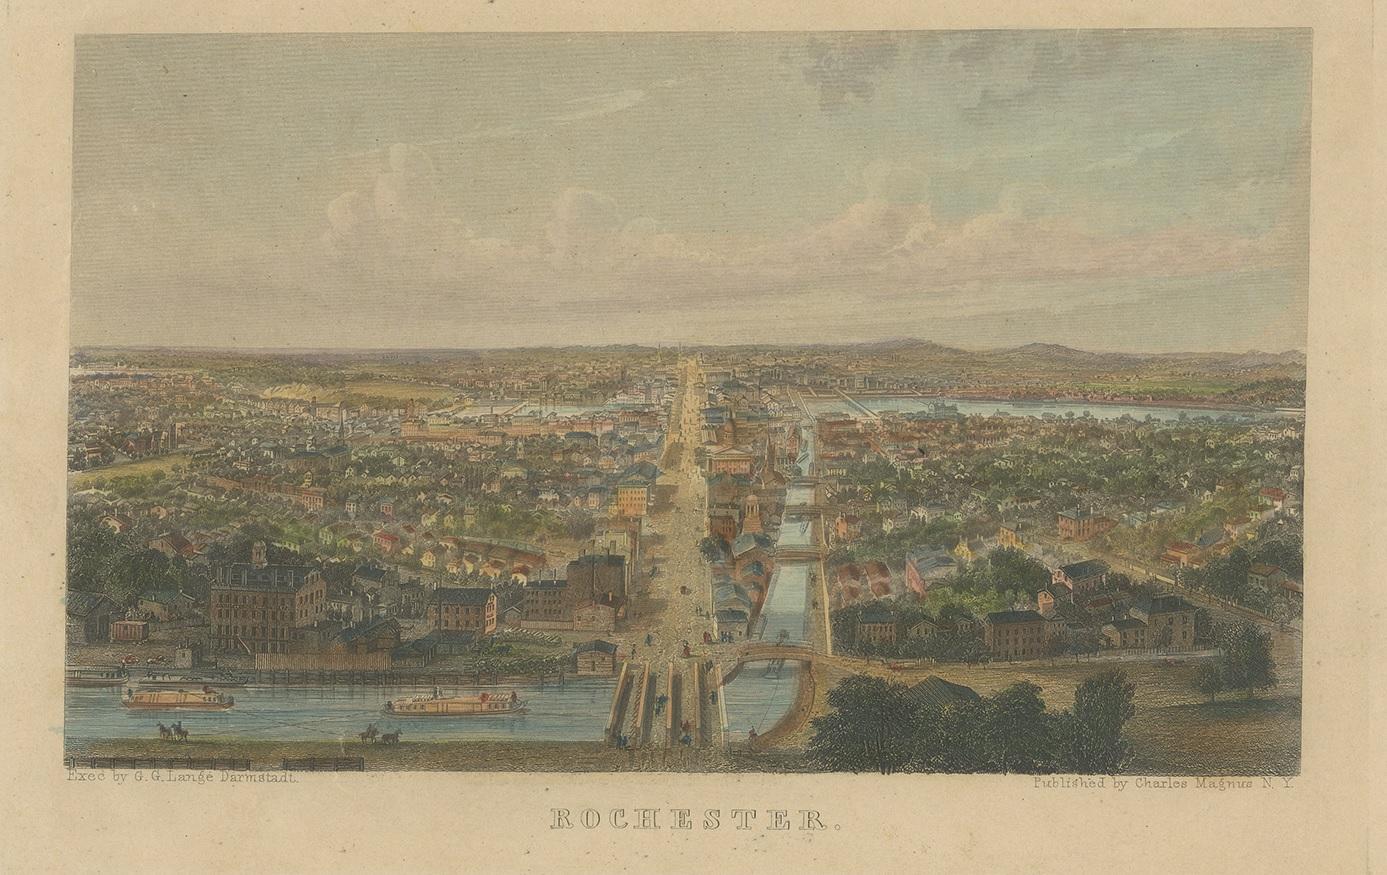 Antique print titled 'Rochester'. Hand colored steel engraving of Rochester including the Genesee river. Published by Charles Magnus, New York.